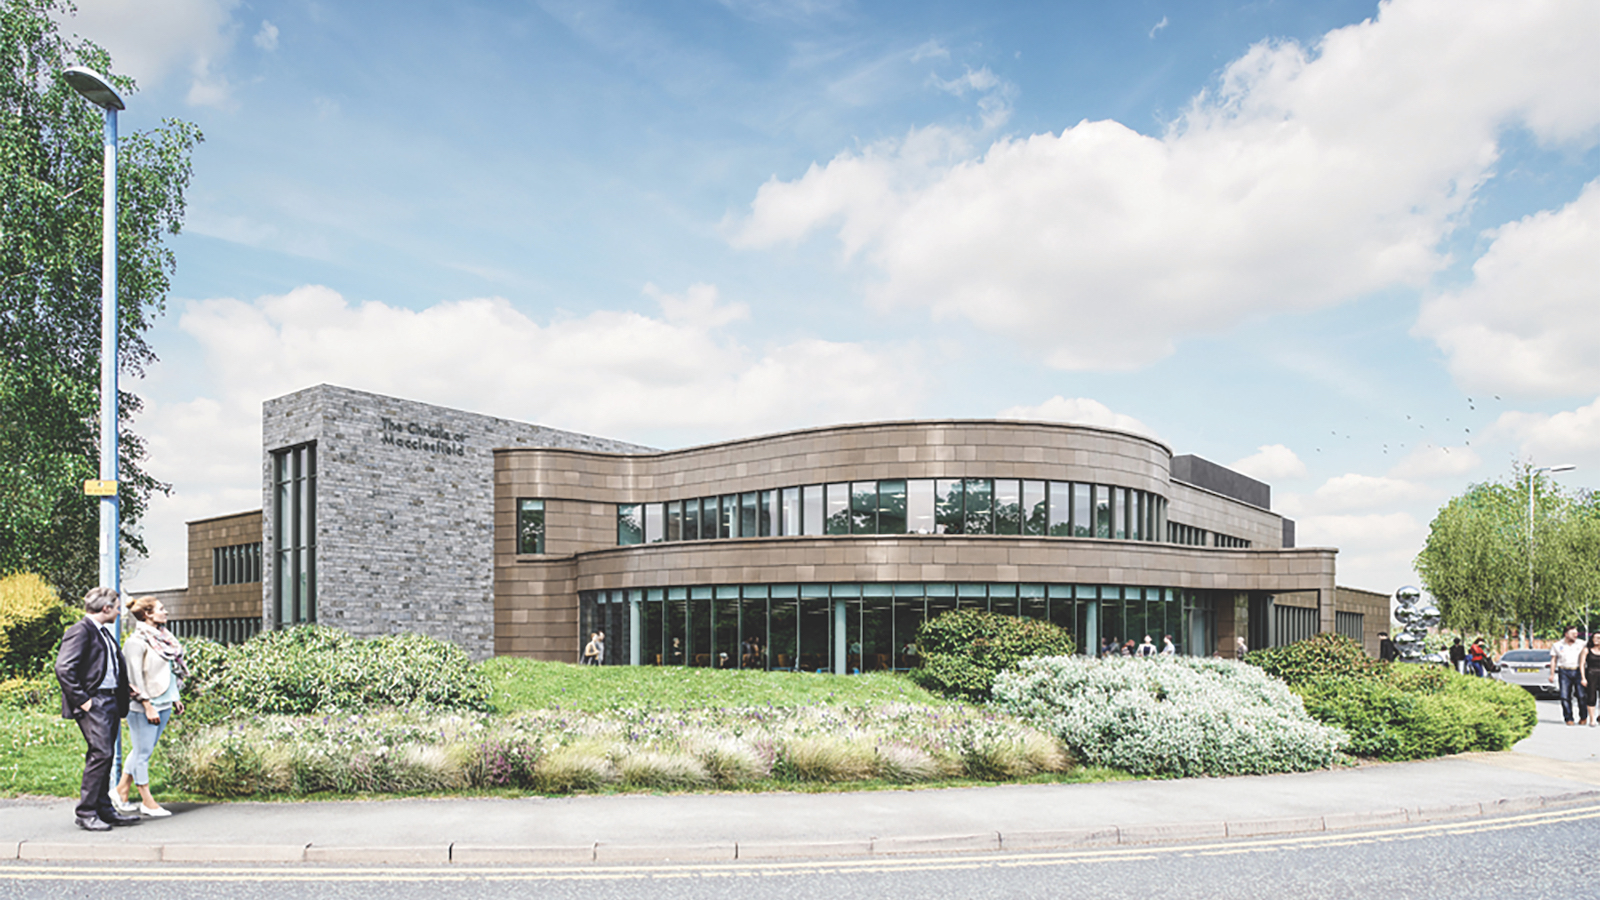 Hive provided project management services for The Christie at Macclesfield